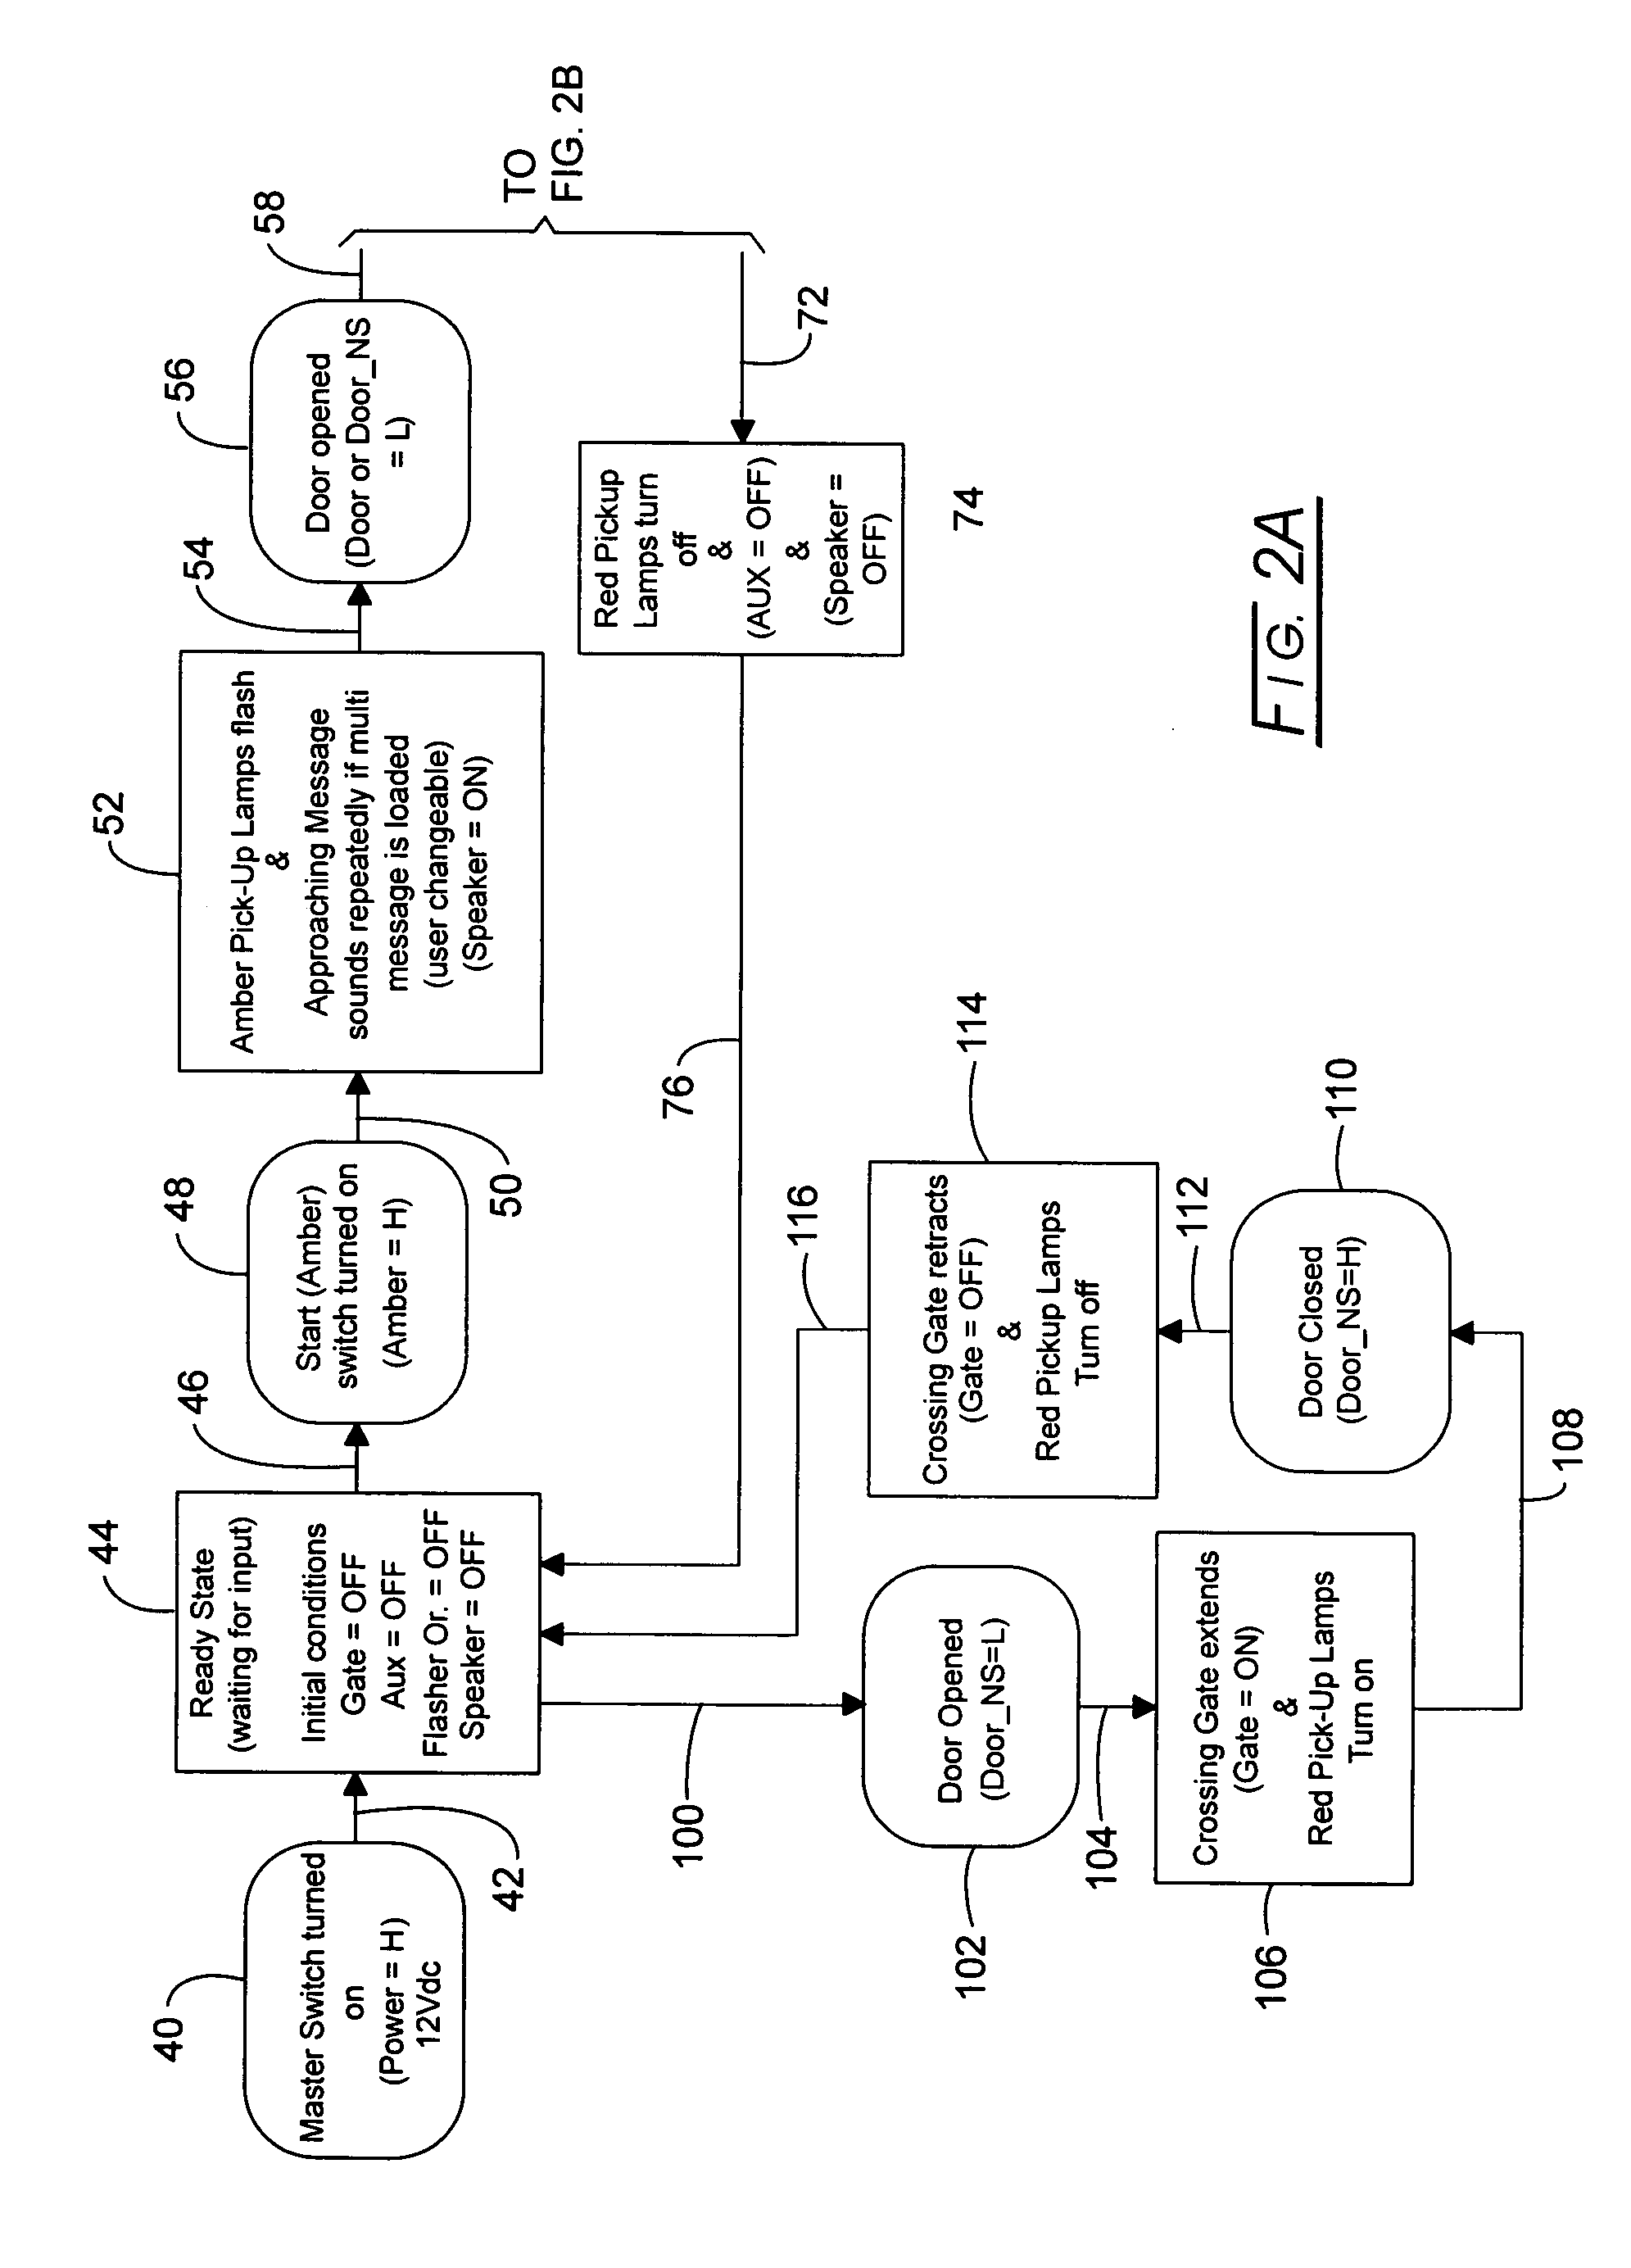 Bus safety controller method and system